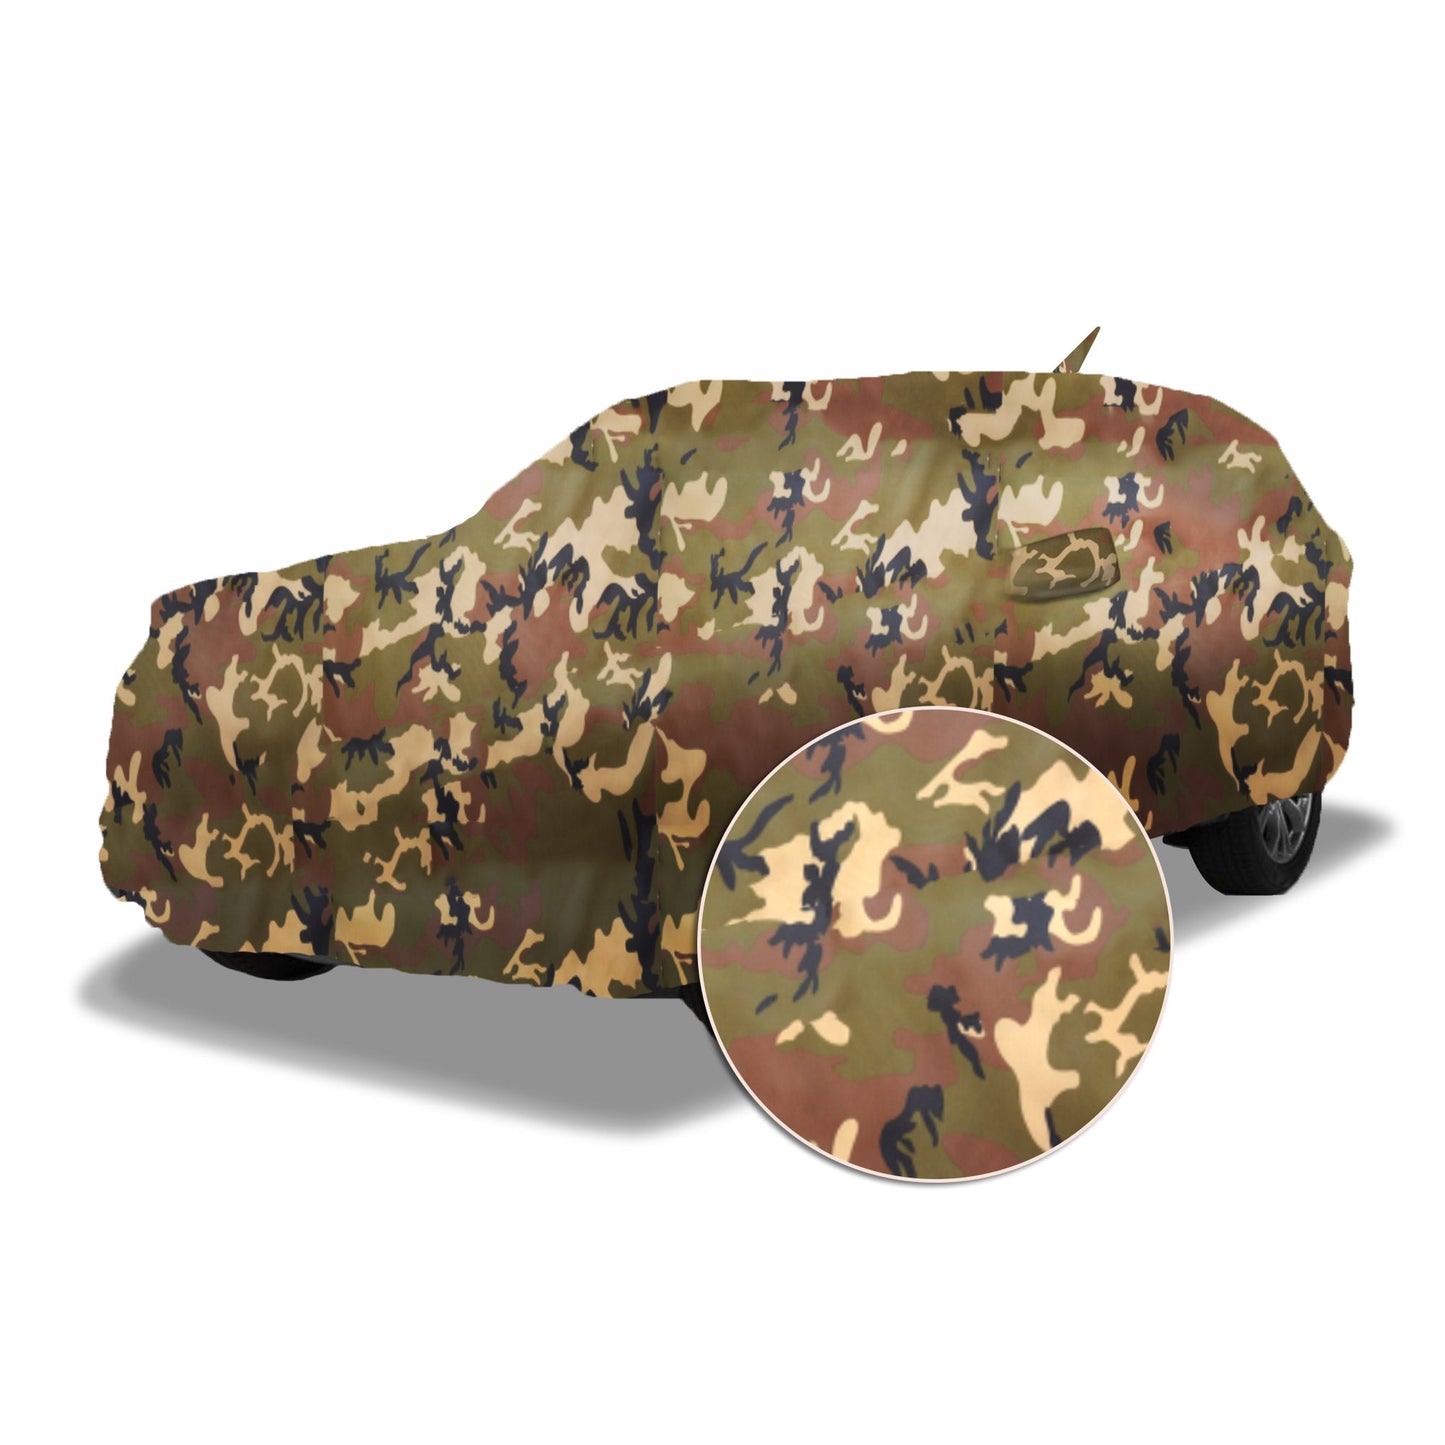 Ascot Mercedes-Benz GLE 2019-2023 Model Car Body Cover Extra Strong & Dust Proof Jungle Military Car Cover with UV Proof & Water-Resistant Coating